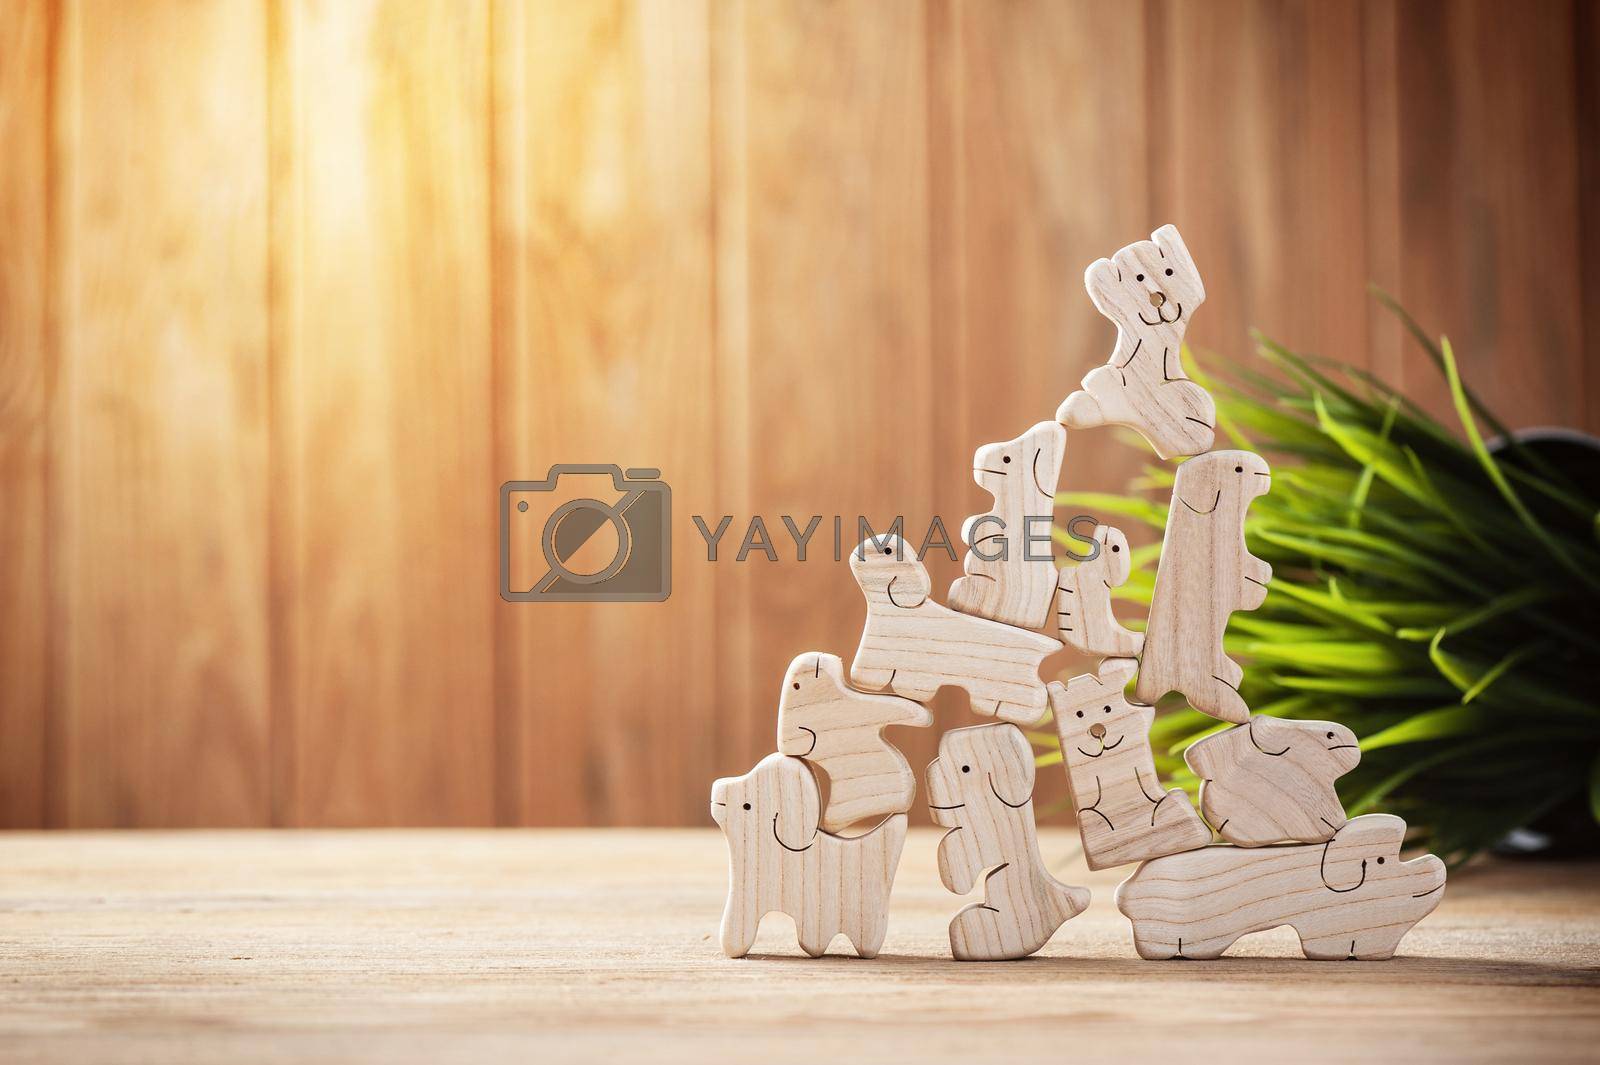 Royalty free image of wooden toy animals by norgal